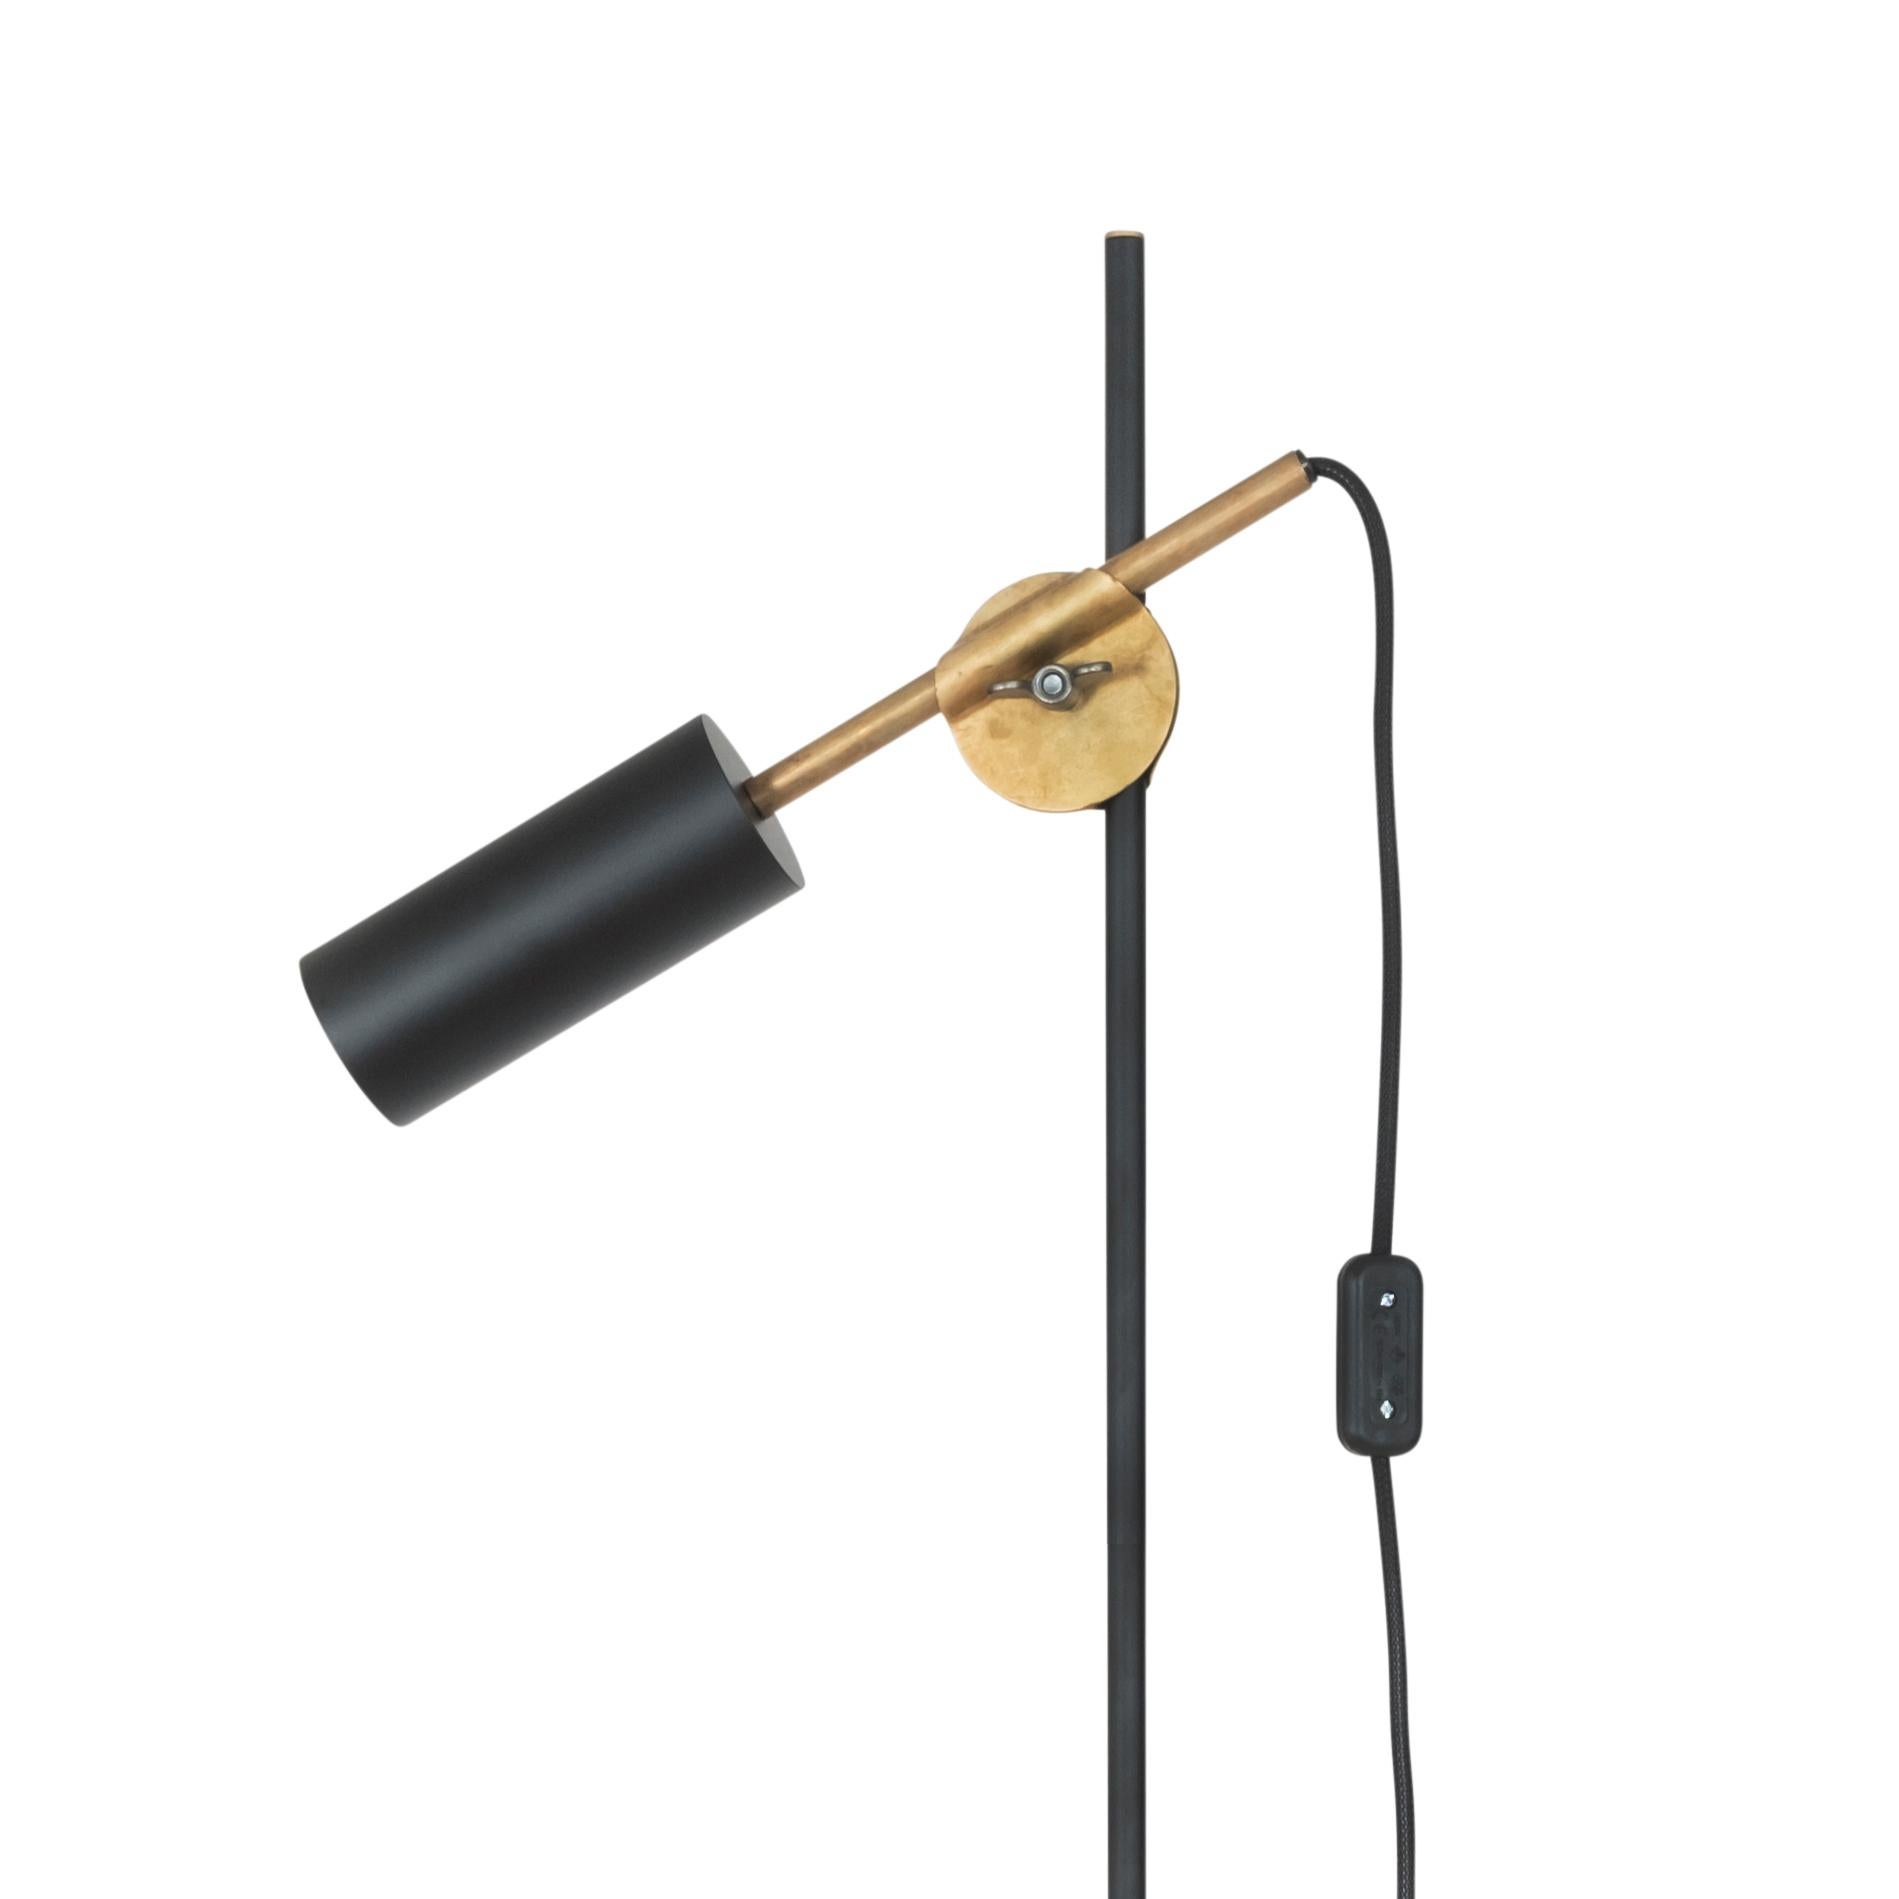 Floor lamp designed by Johan Carpner manufactured by Konsthantverk Tyringe in Sweden.

STAV floor
D. 400 mm
H. 1400 mm
Max 10 W GU10
2451-8 Black/raw brass

The lamps are wiring with standard Europe wiring.

Stav floor is a lamp series that is